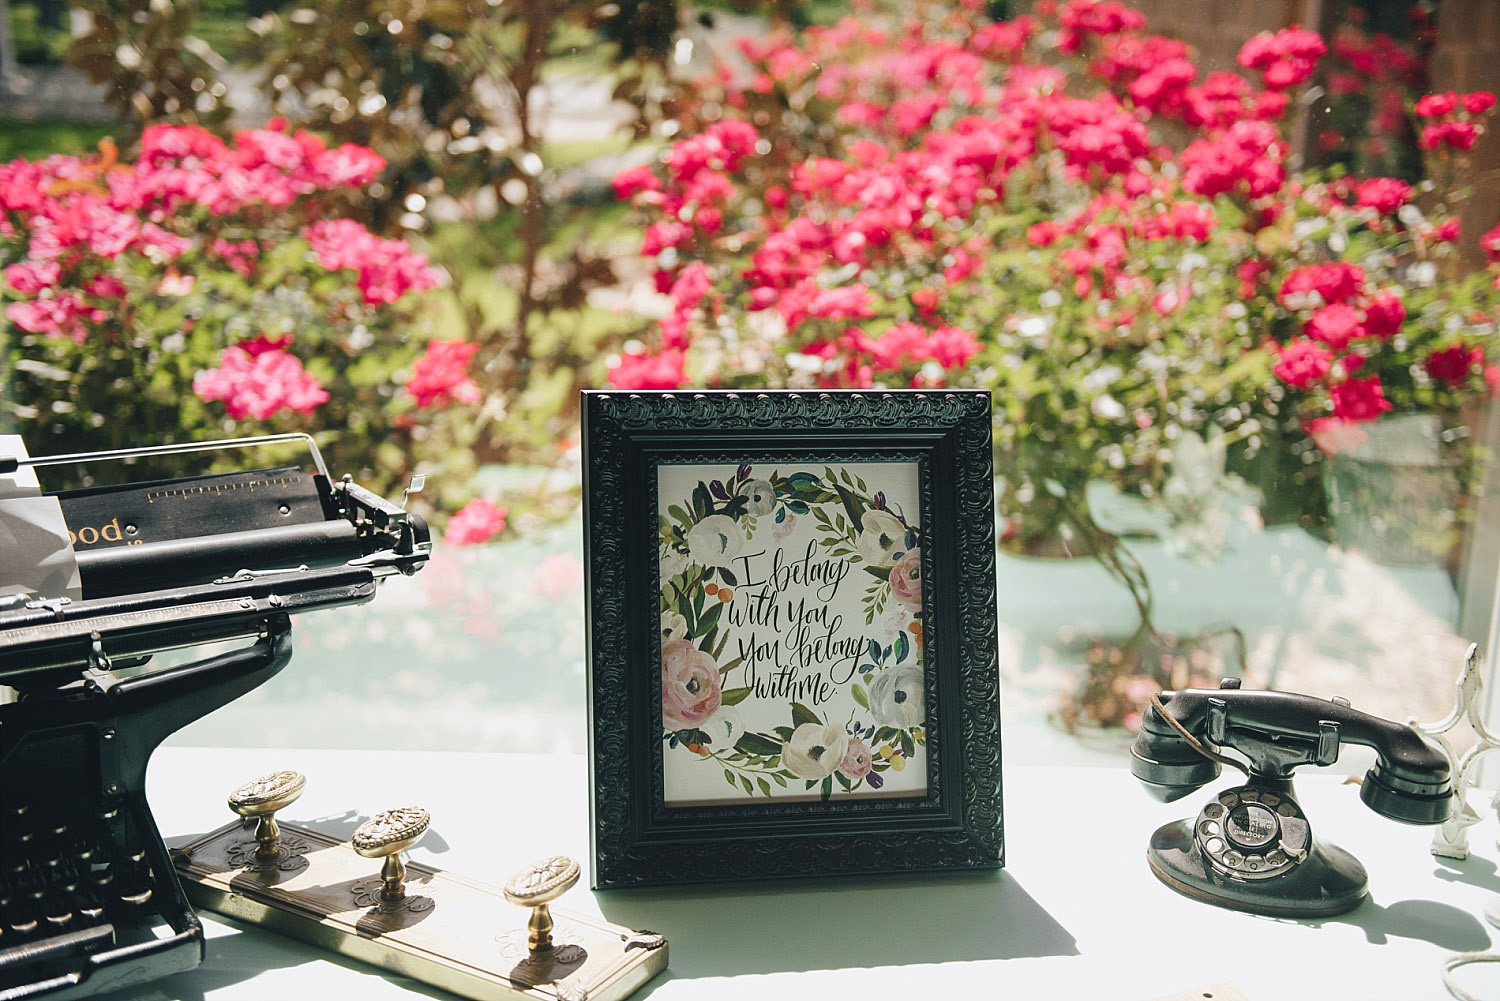 The Orchard Azle wedding floral welcome sign next to typewriter